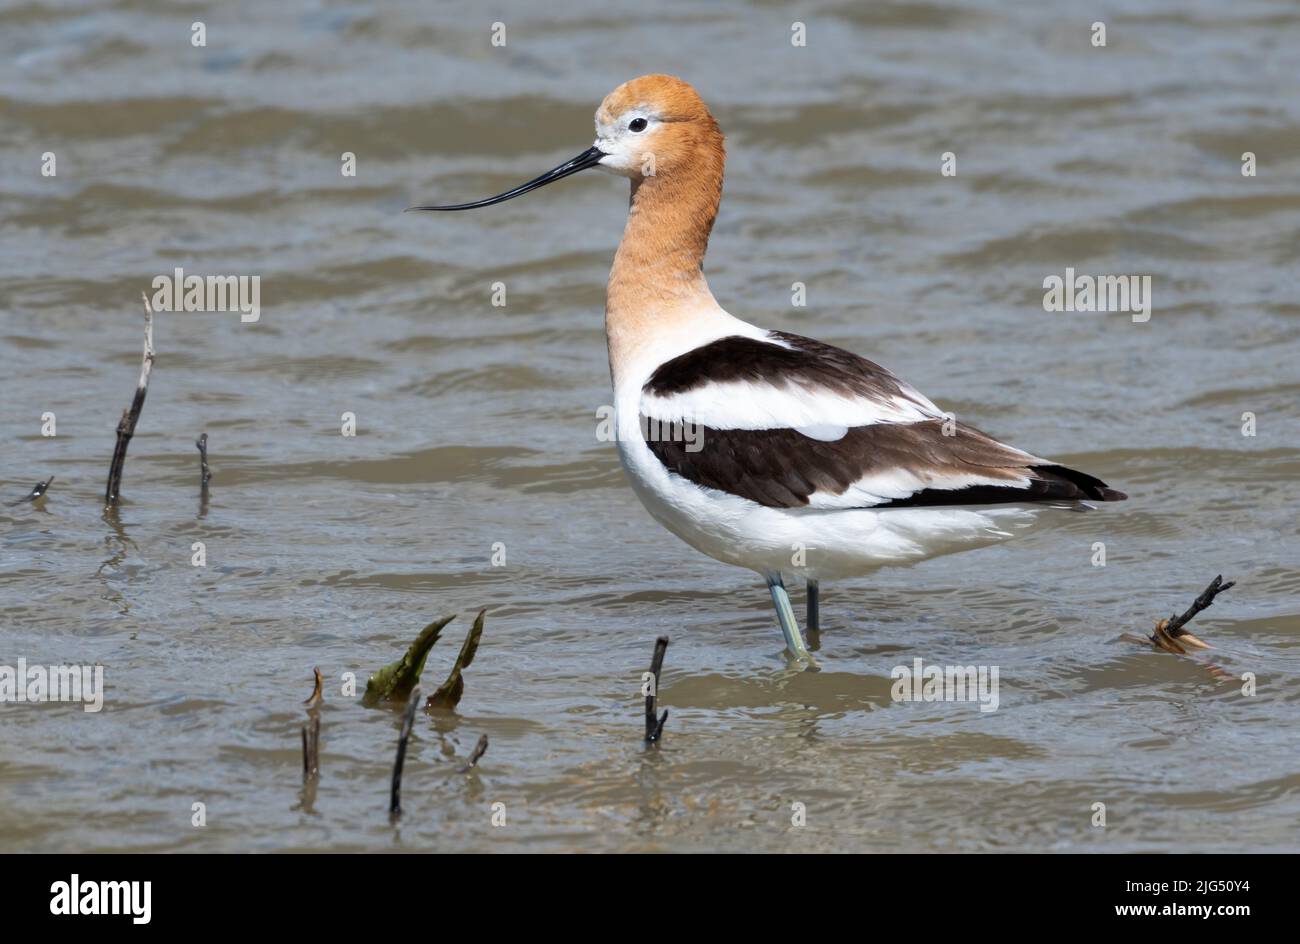 Closeup of an American Avocet, Recurvirostra americana, wading in shallow water in the wetlands in sunlight. Bird in wild. Stock Photo